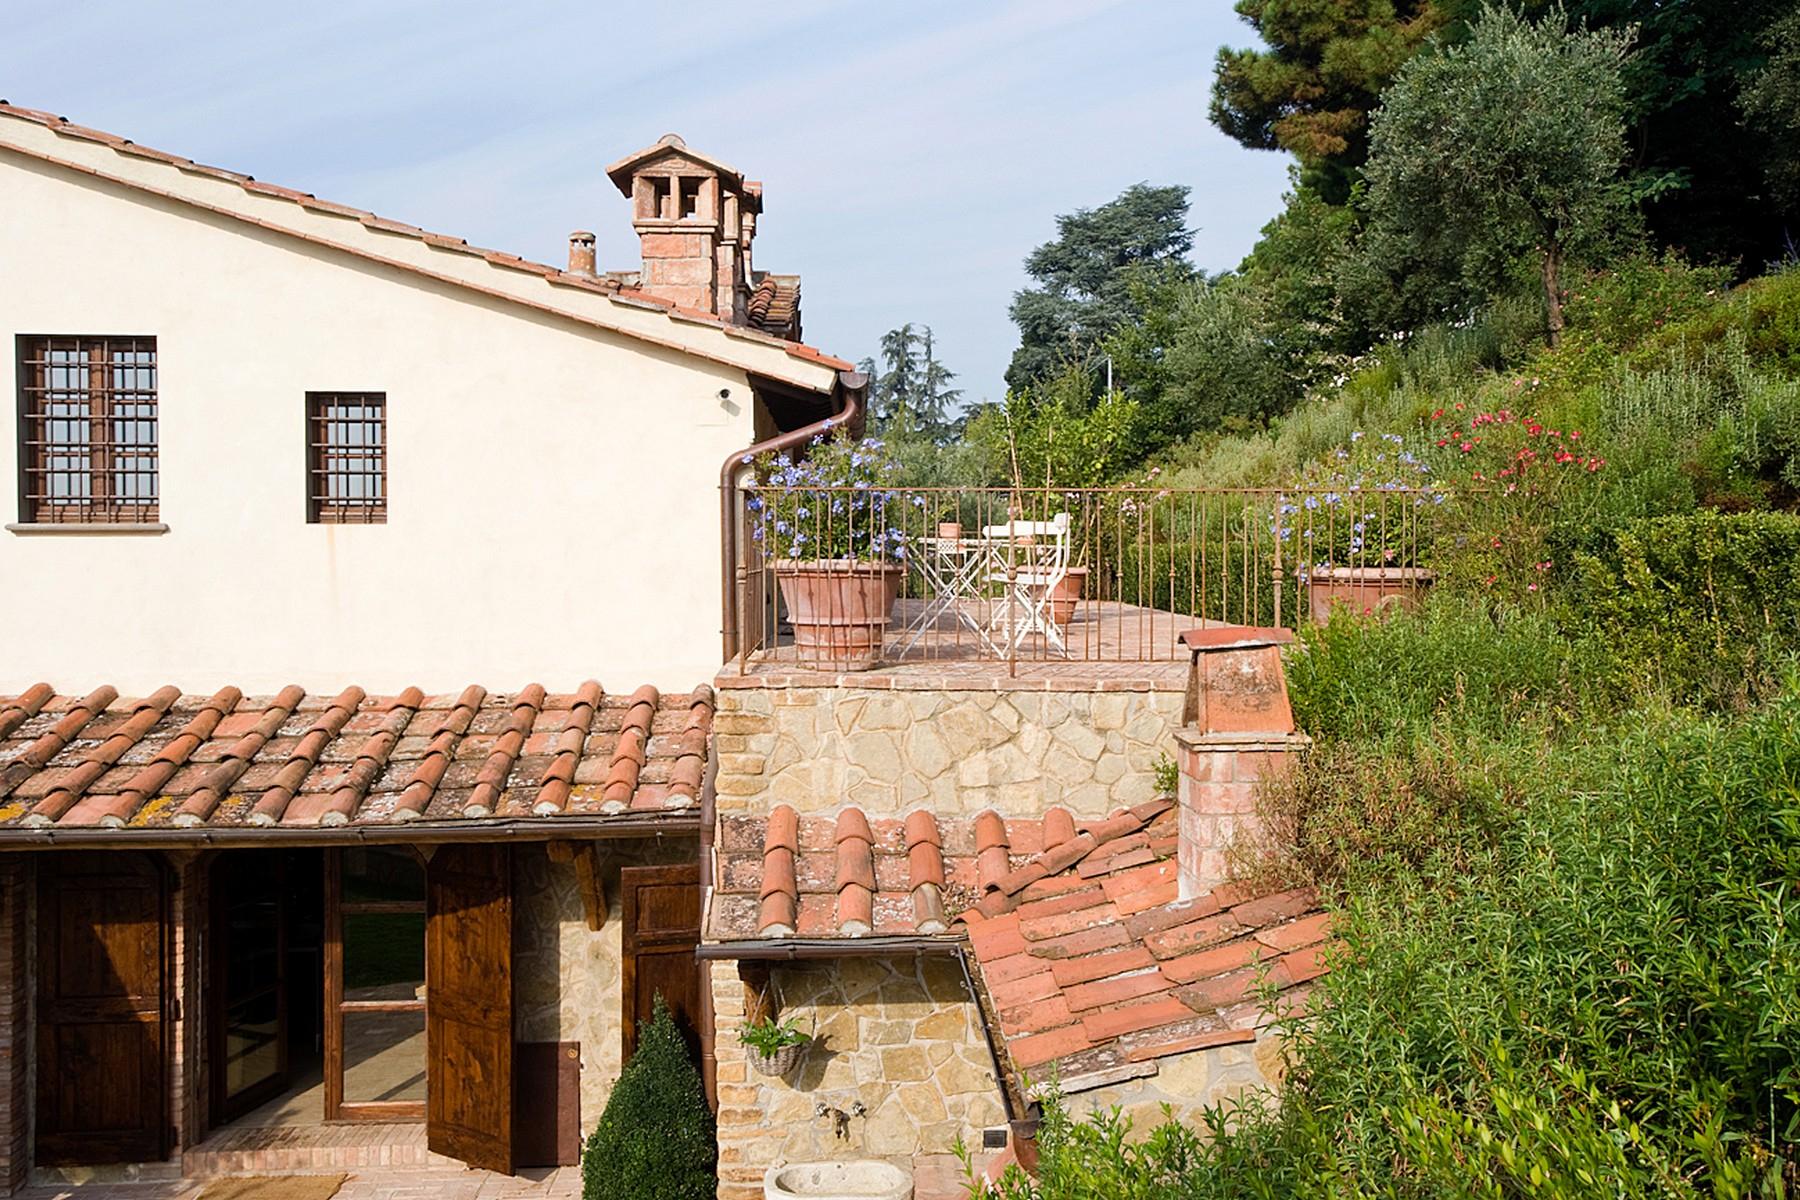 Farmhouse for sale in the Tuscan hills - 22